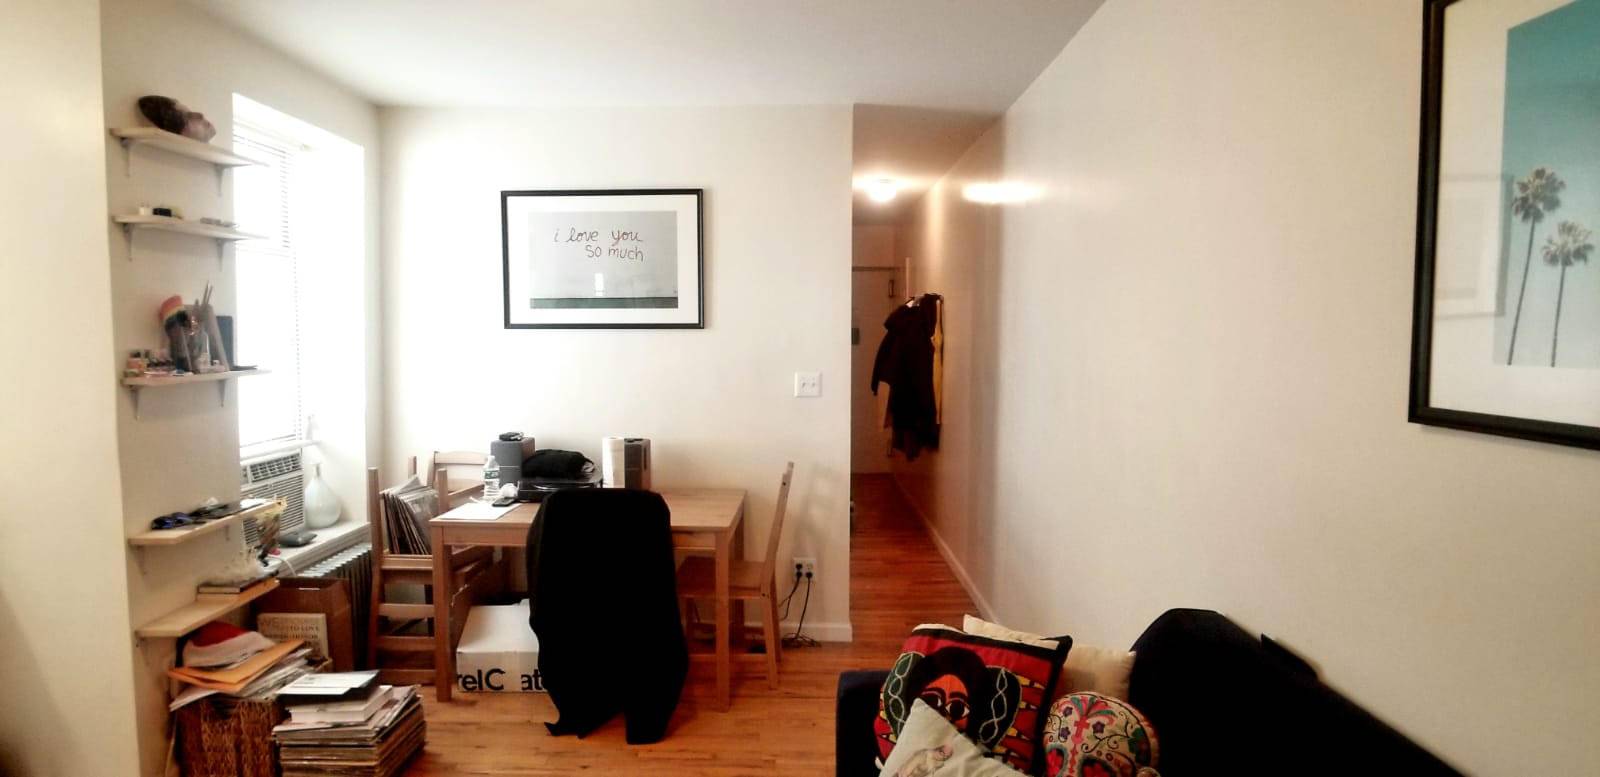 SPACIOUS 2BED RIGHT IN BEAT OF WILLIAMSBURG!